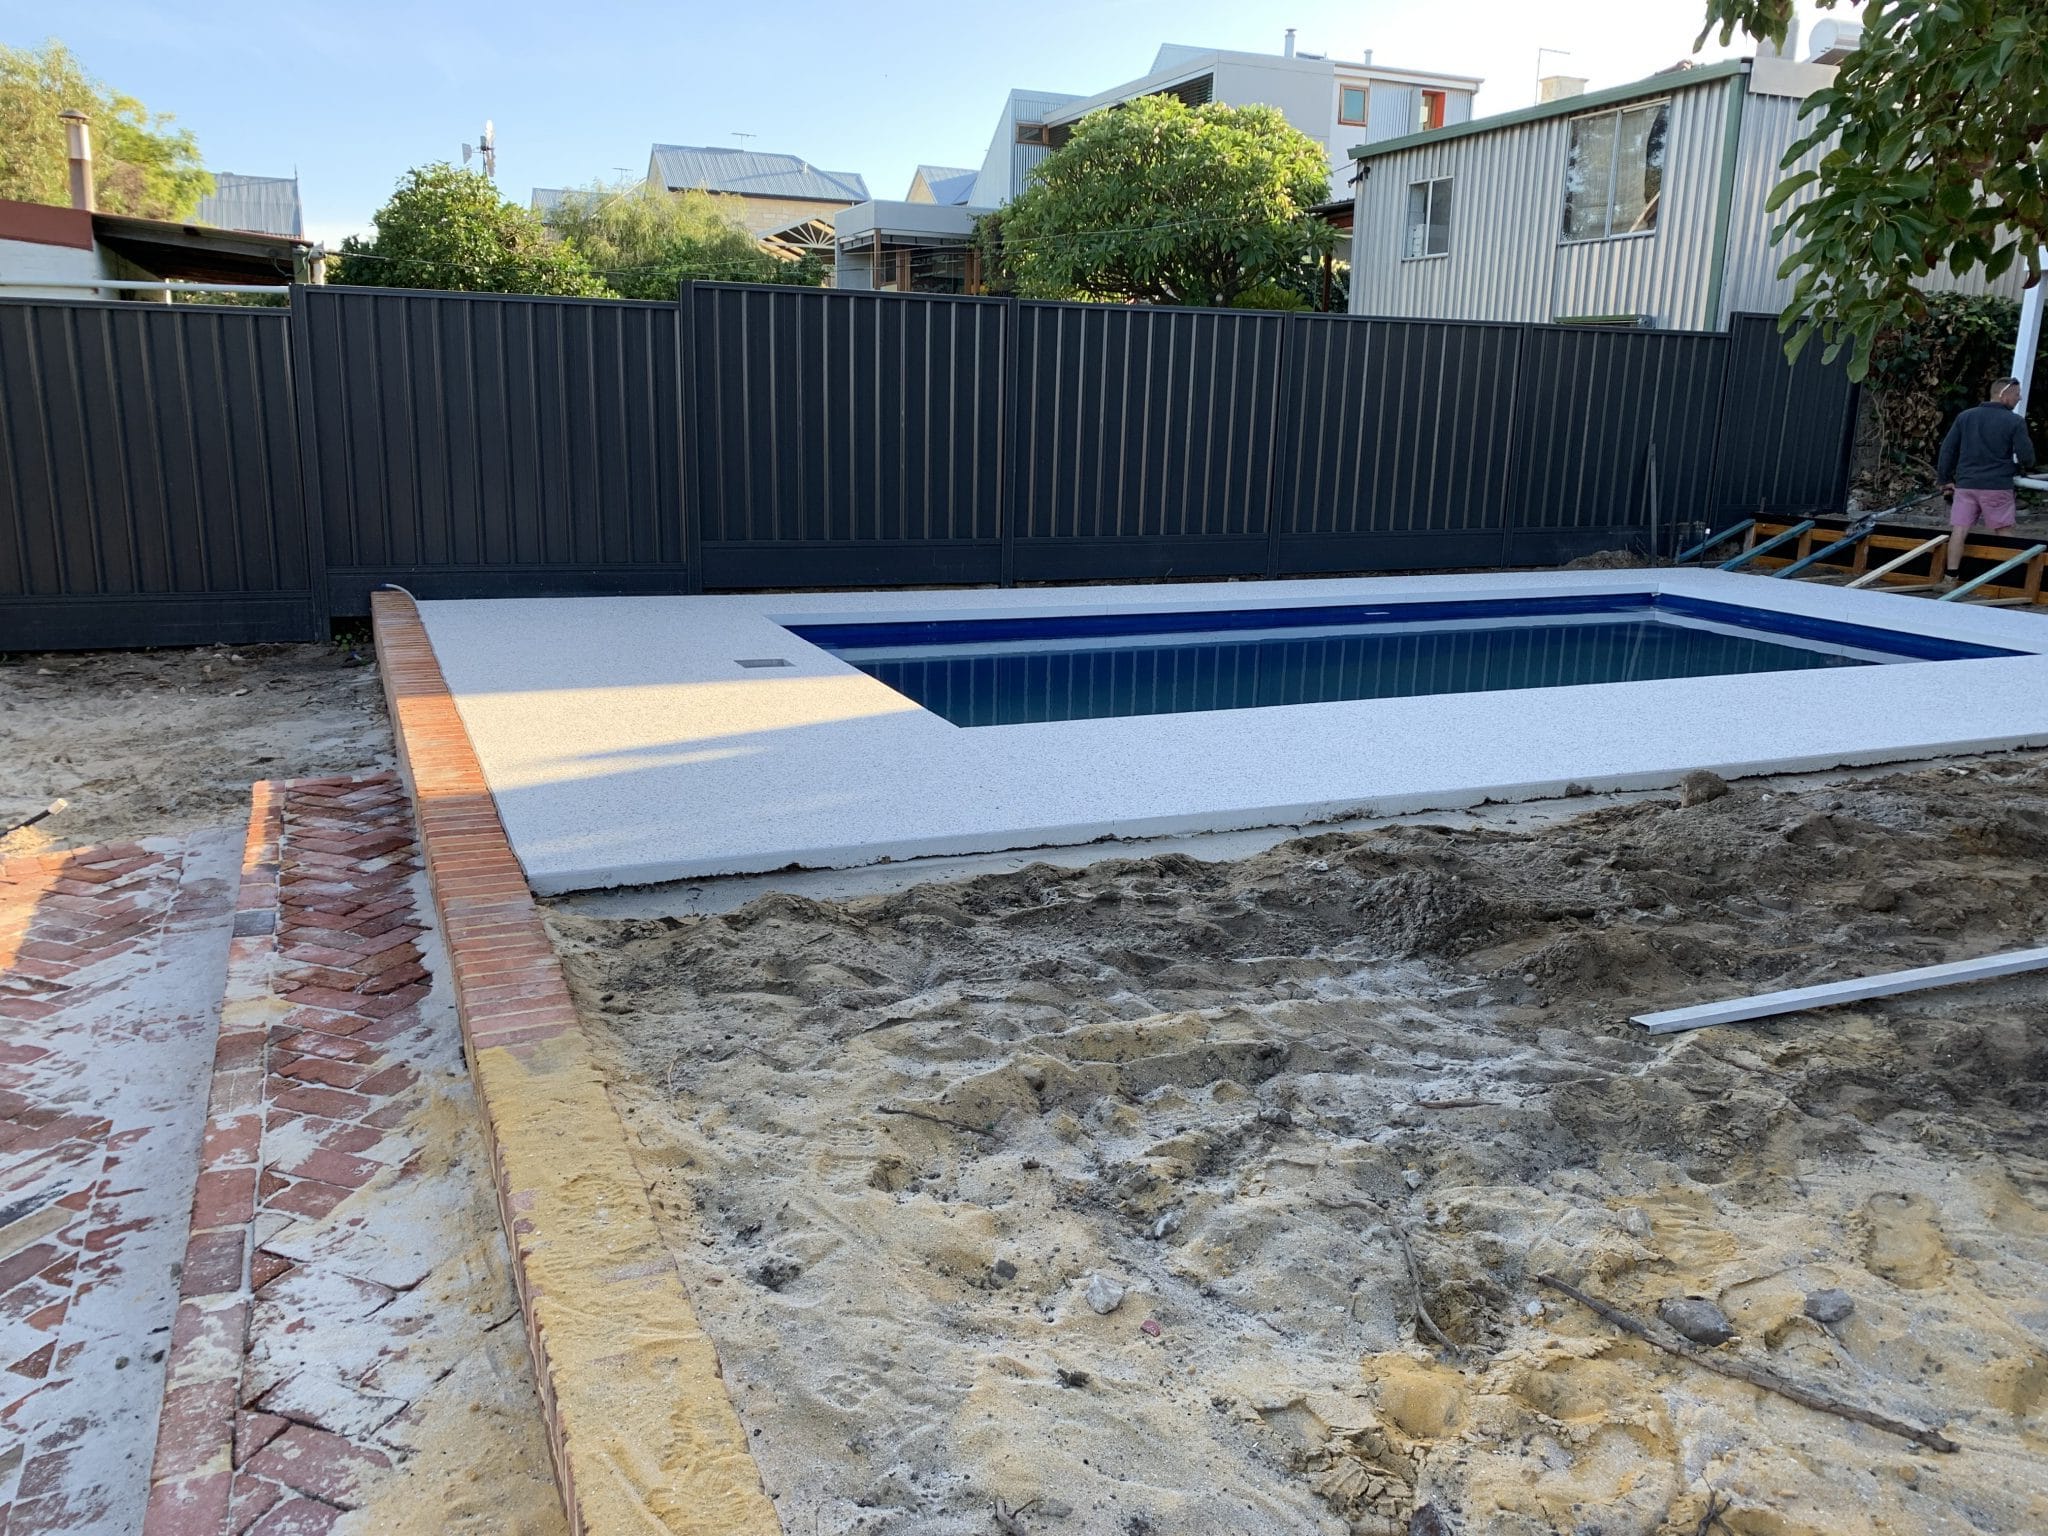 Prepping the Perfect Pool in Perth